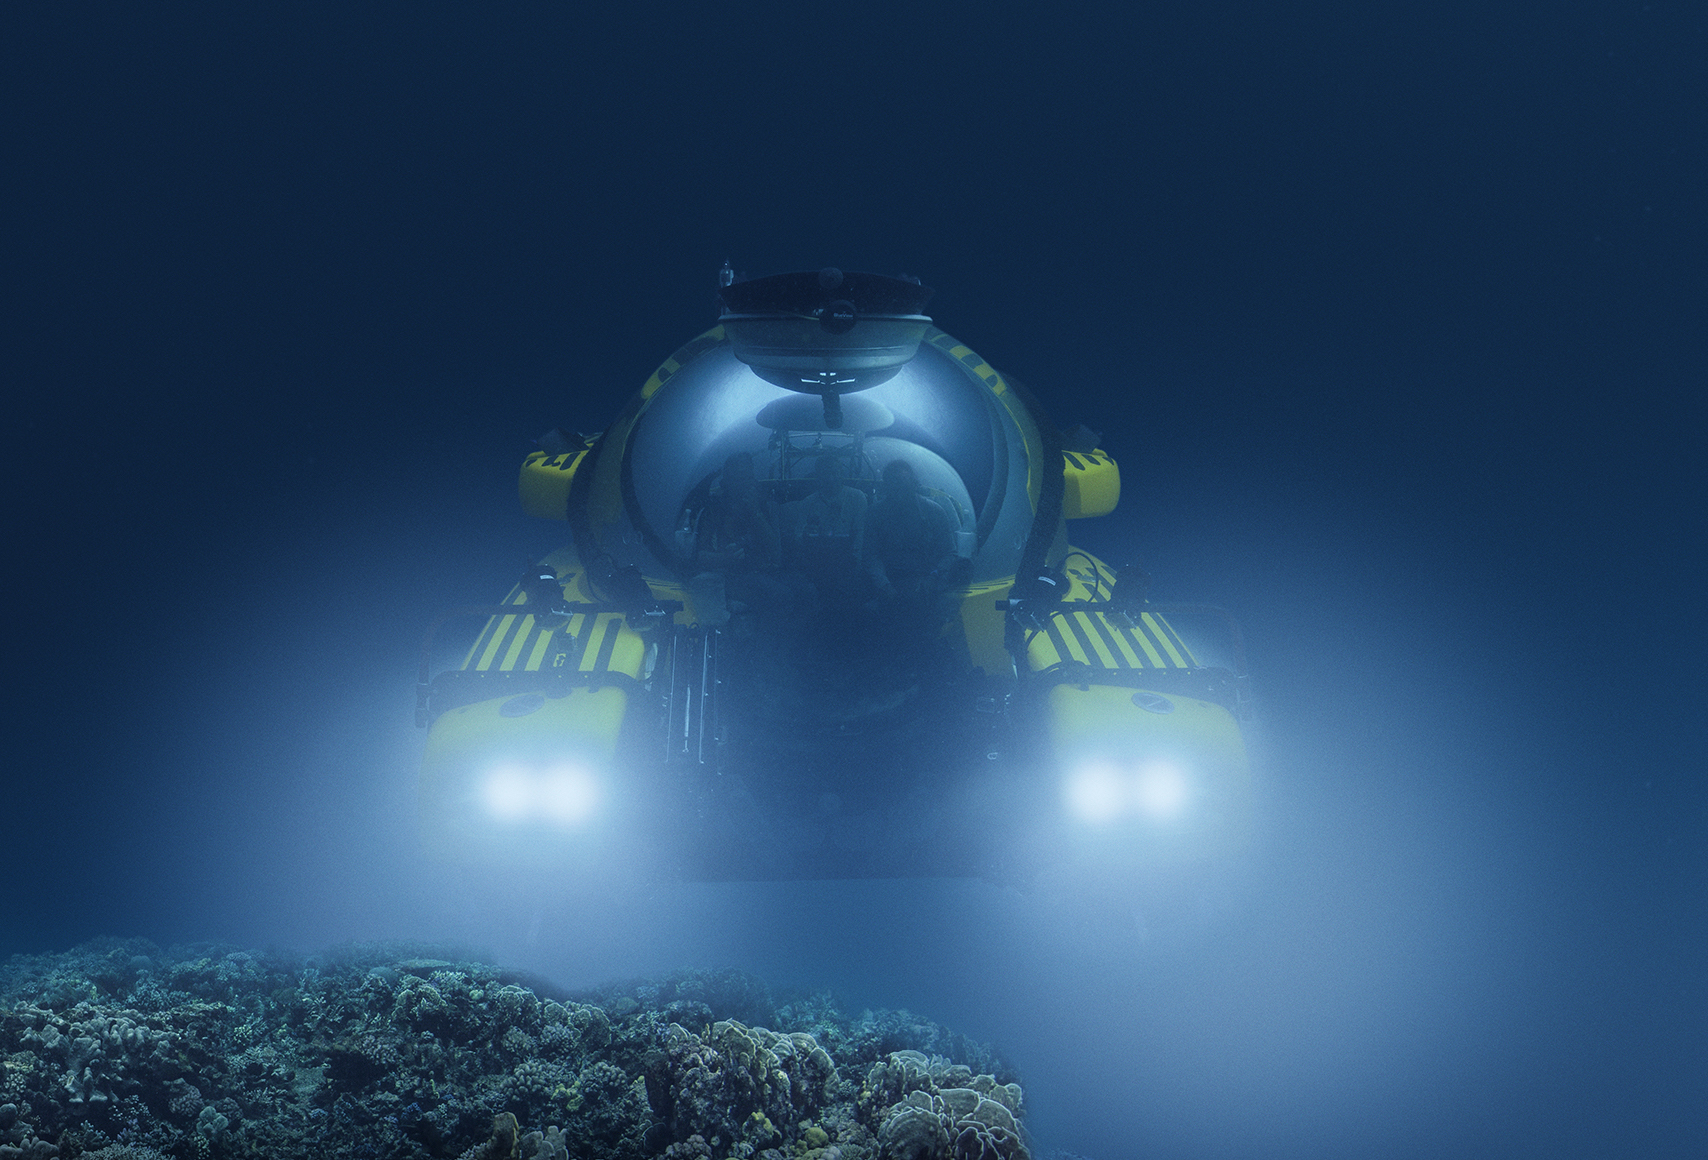 An image of a submarine, with lights lit, underwater.